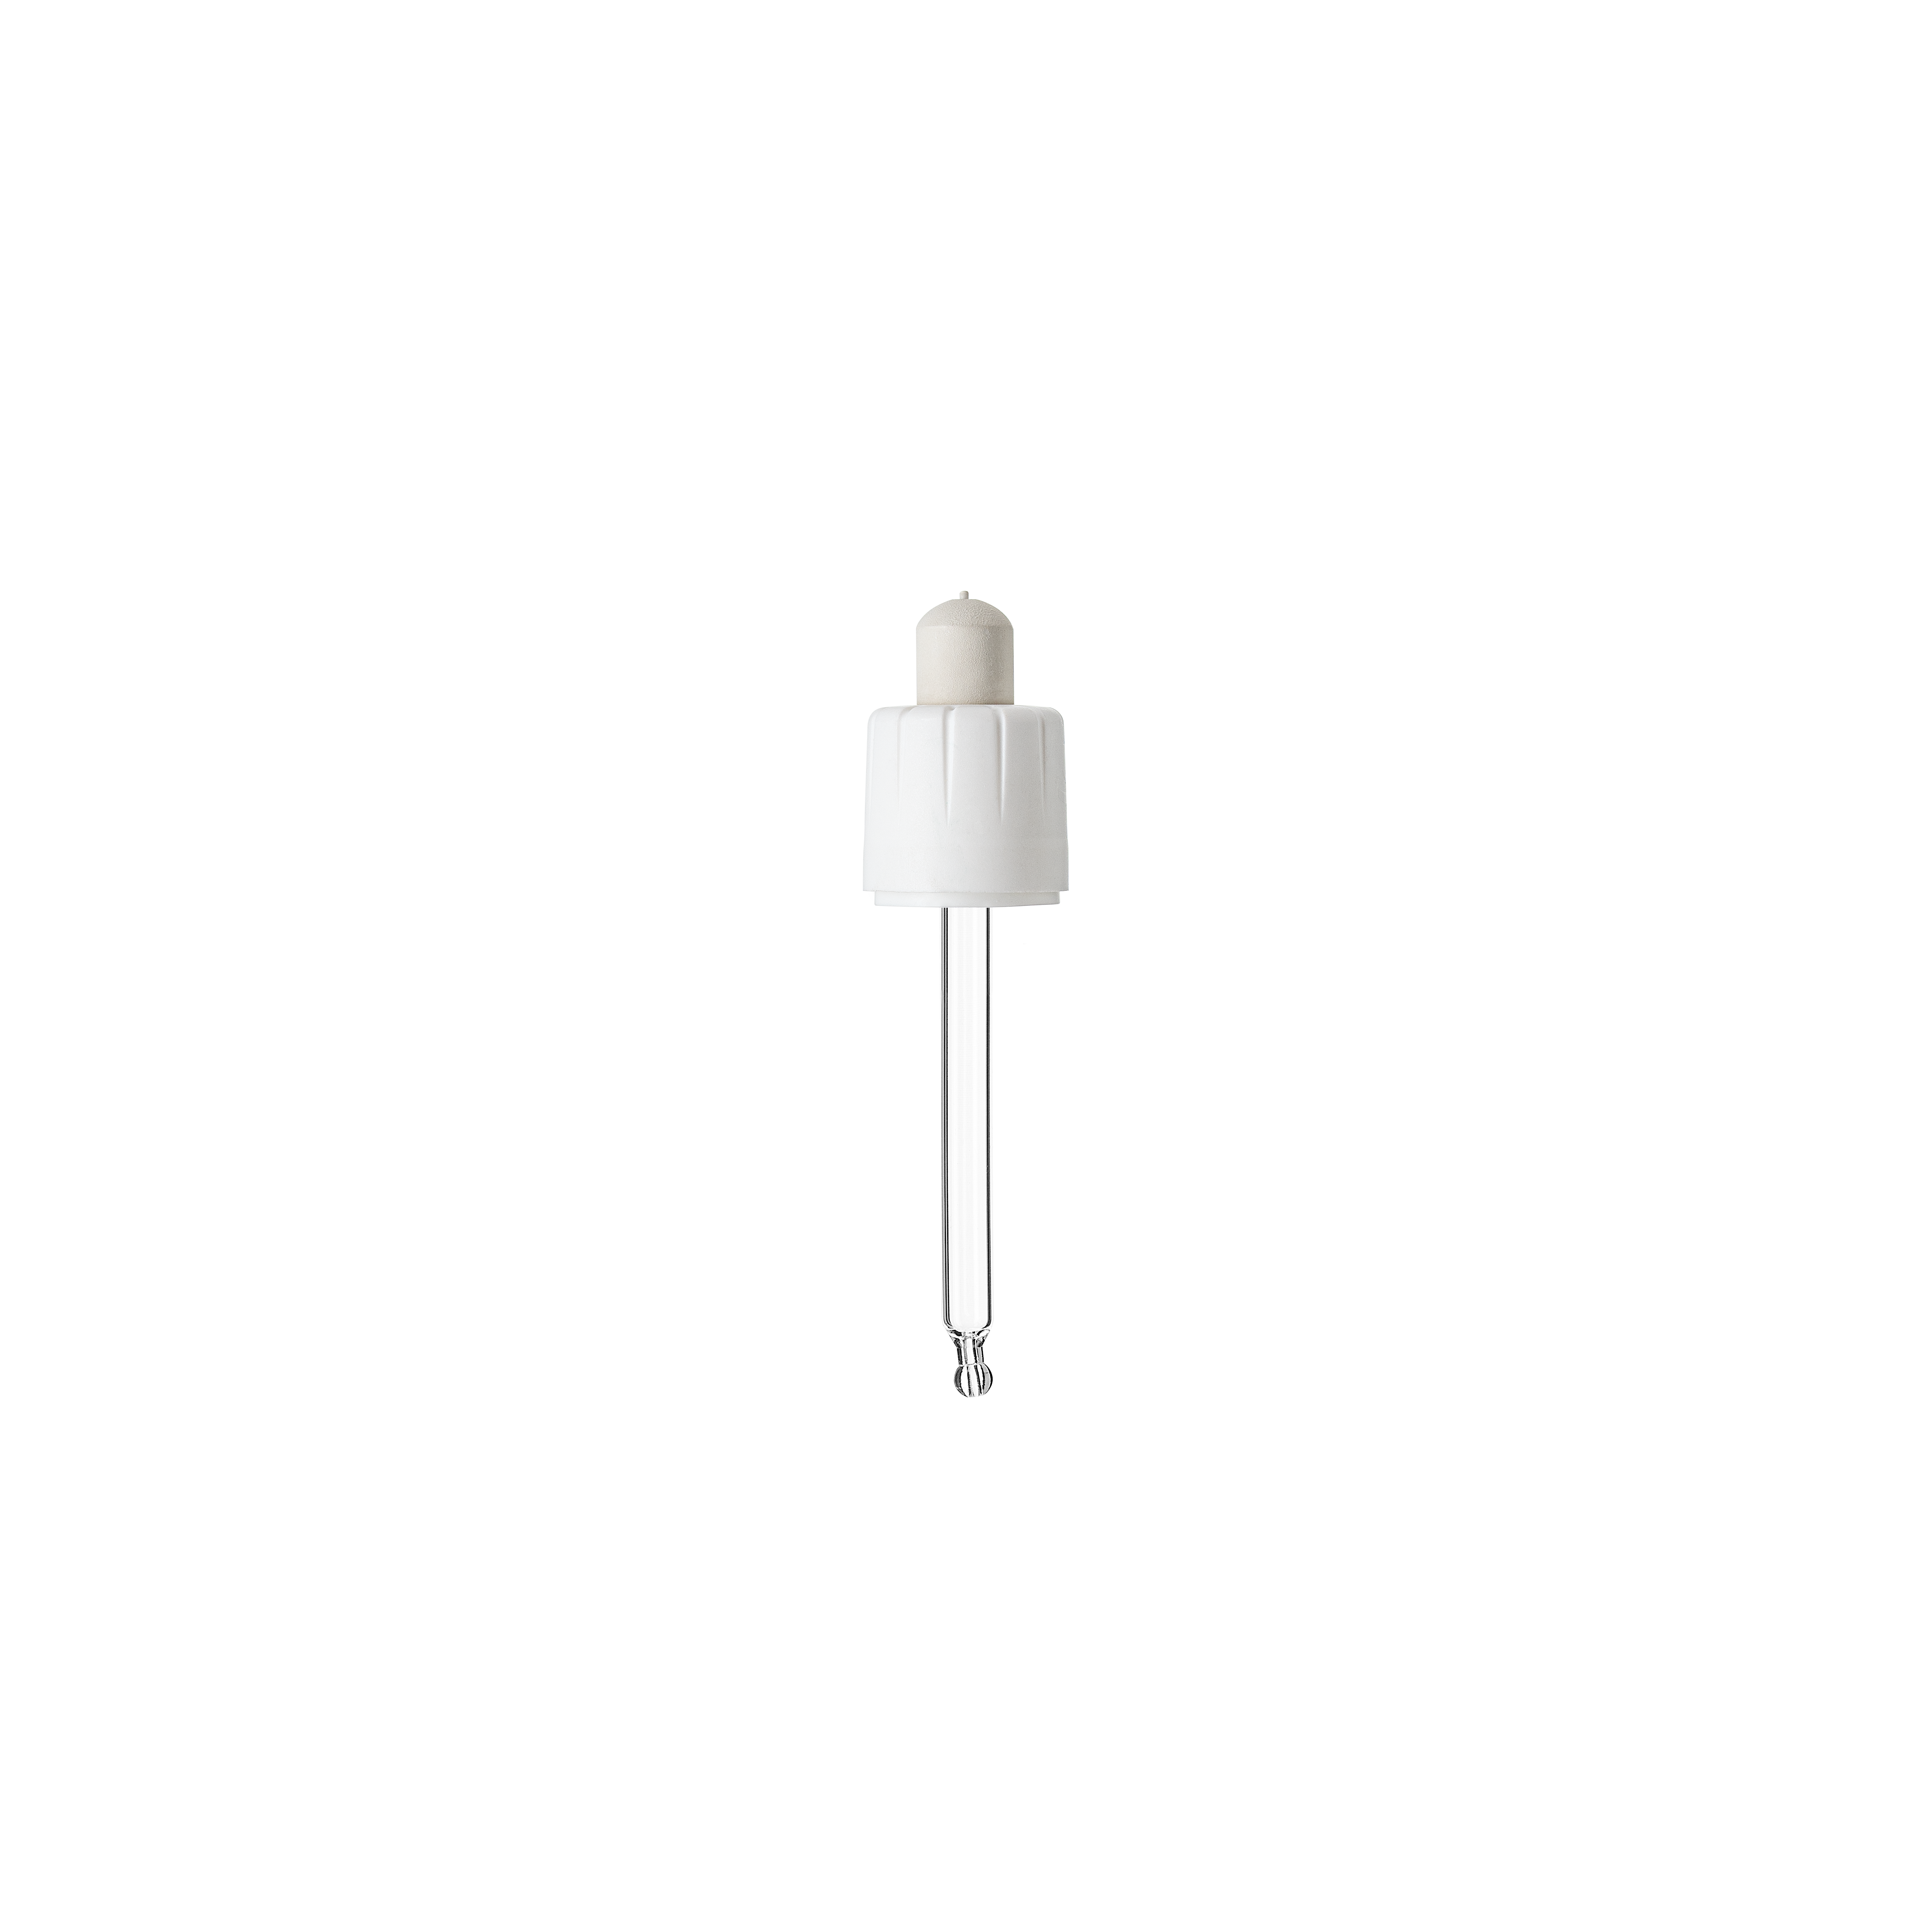 Child-resistant pipette series II, DIN18, tamper-evident, PP/PEHD, white, fine ribbed, white bulb NBR 0.7 ml, bent ball tip with 1.0 opening for Ginger 30 ml